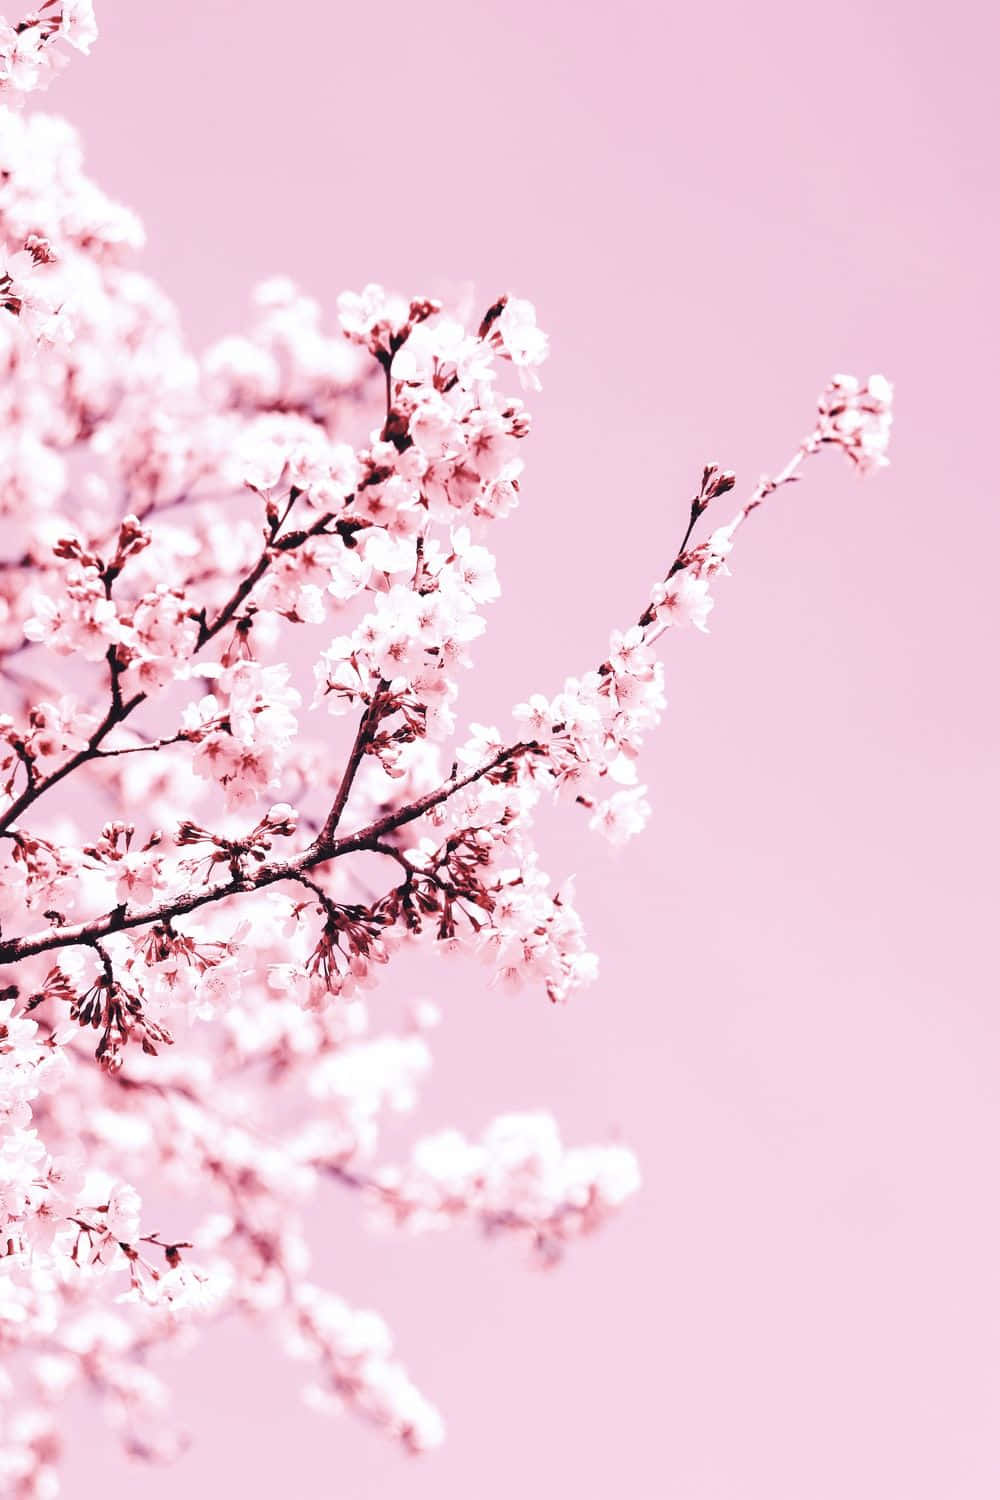 A fascinating view of nature - a breathtakingly beautiful Pink Cherry Blossom tree Wallpaper